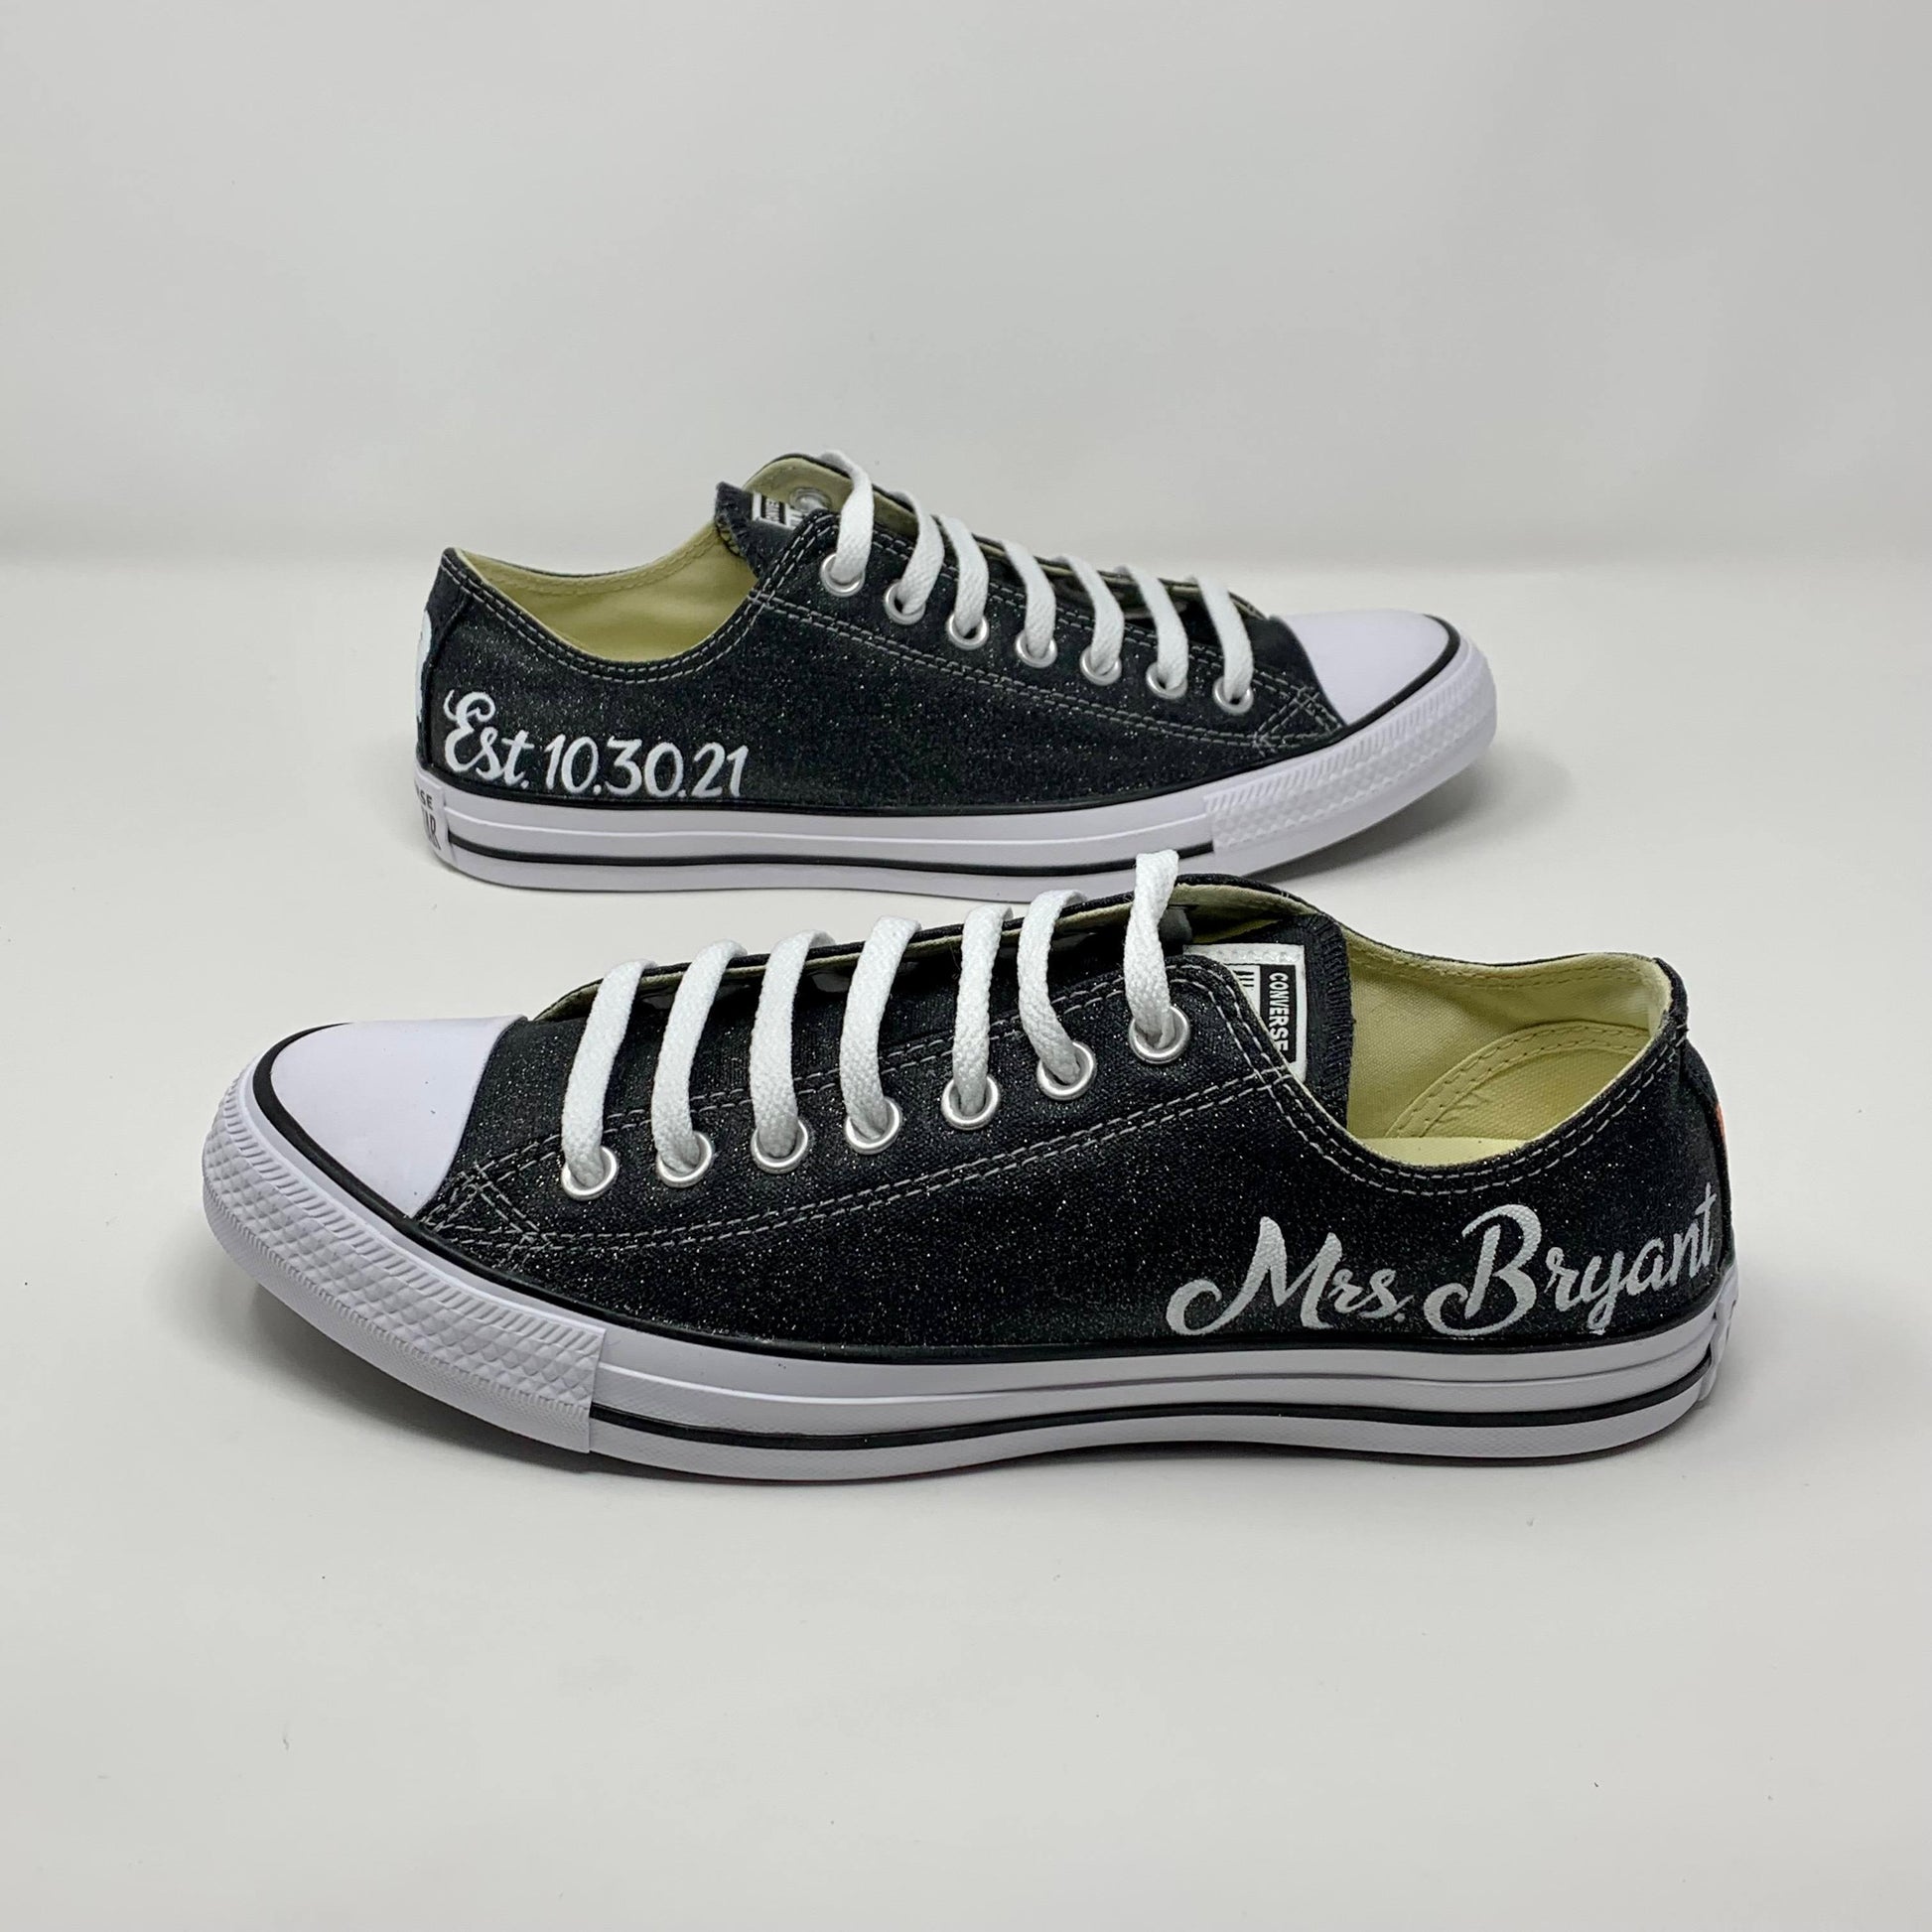 Black Glitter Converse sneakers with Mrs. painted on front for a bride. On a white background